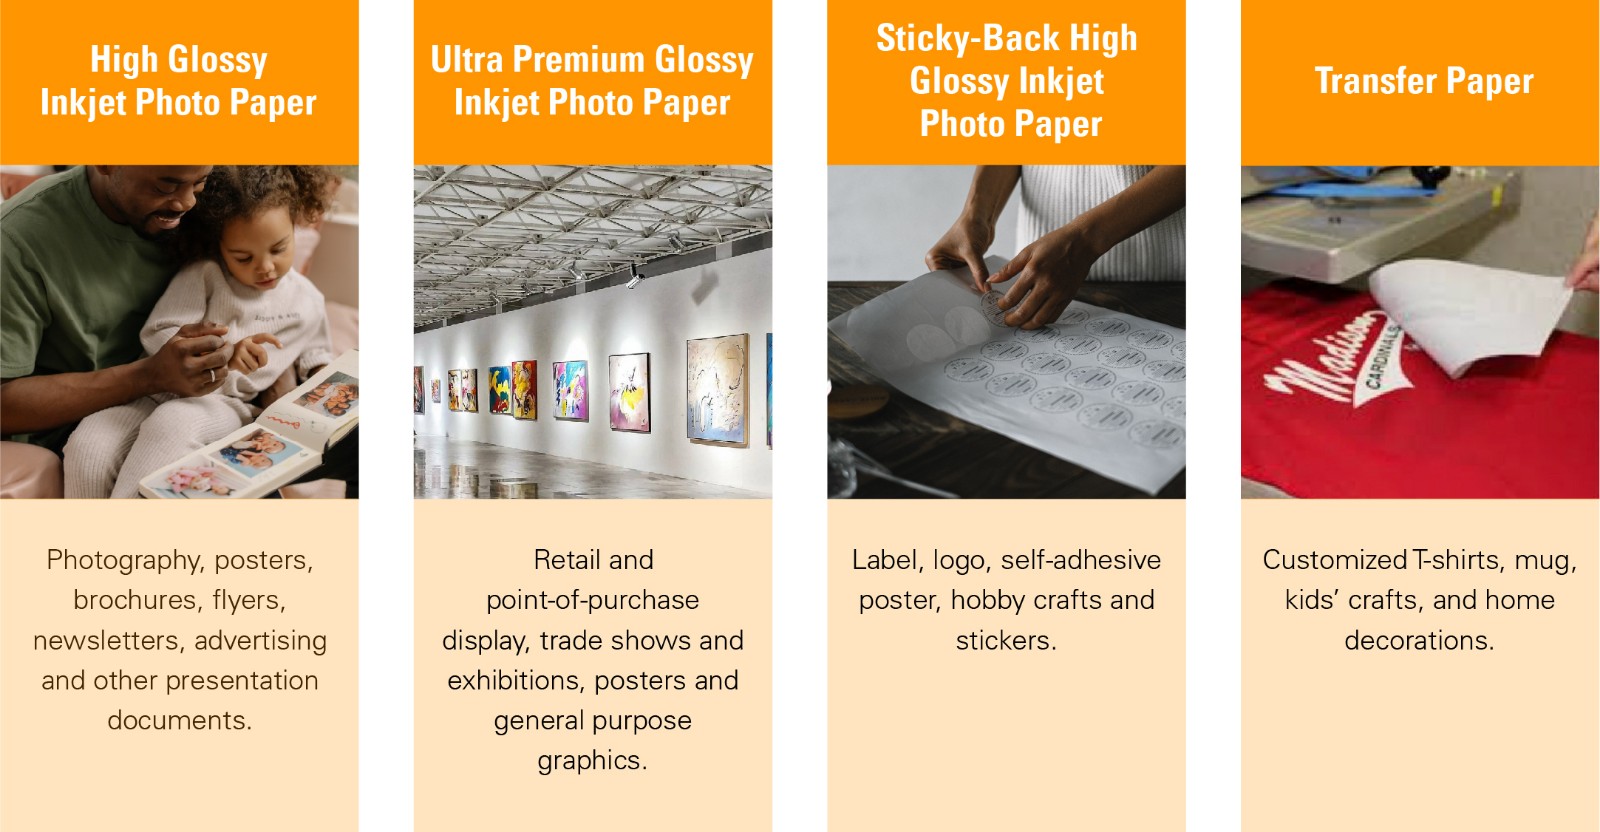 G&G photo paper is now available in a range of categories